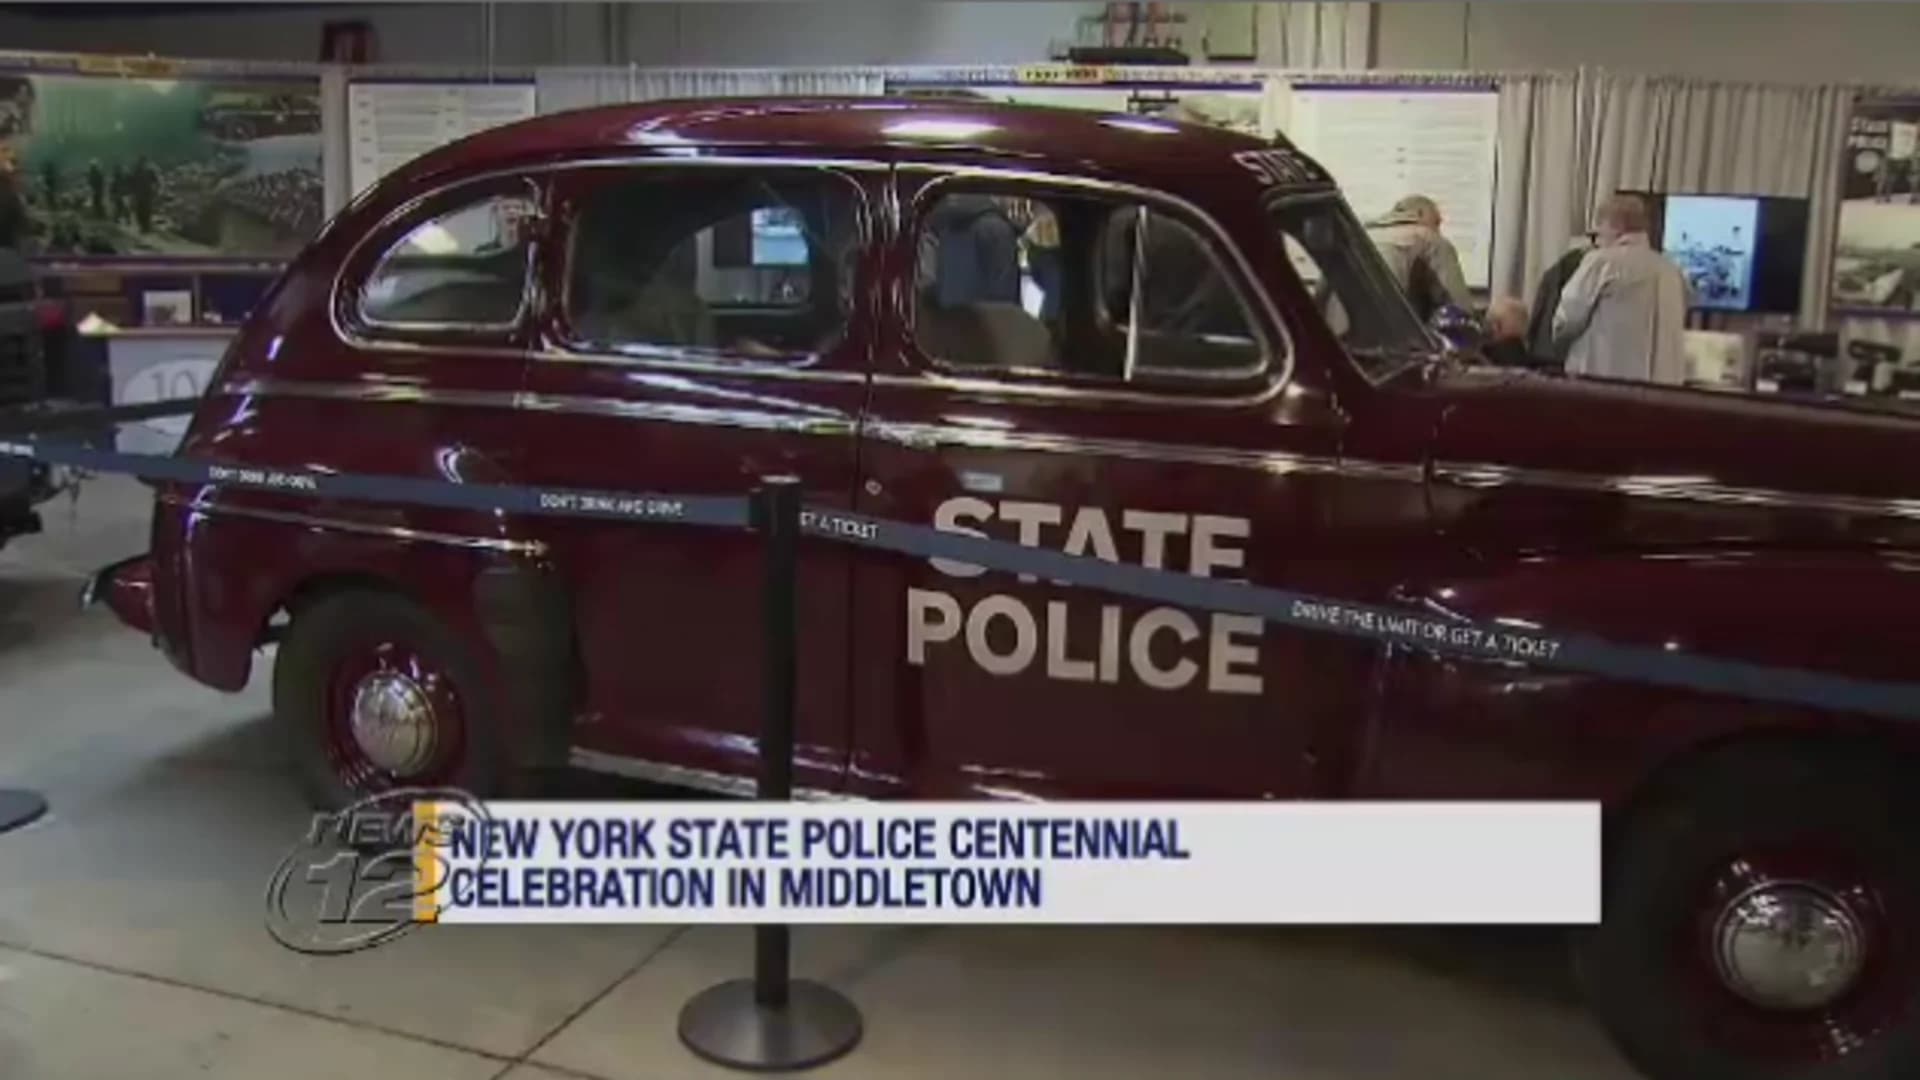 New York State police celebrate 100 years of service